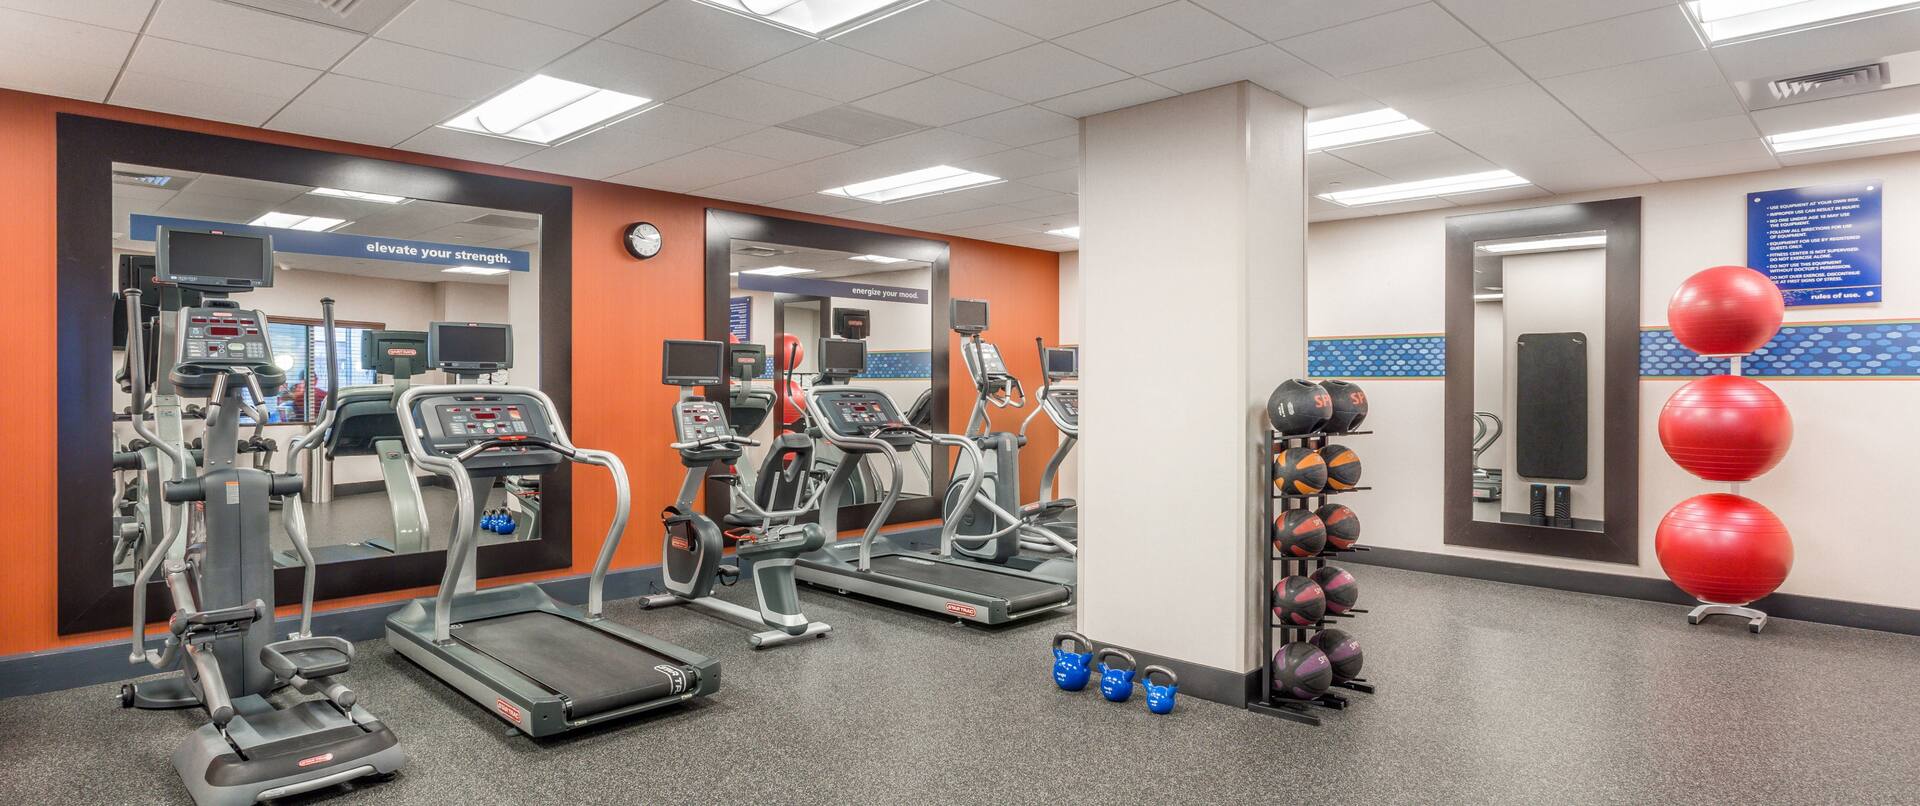 Fitness Center with Treadmills and Exercise Balls